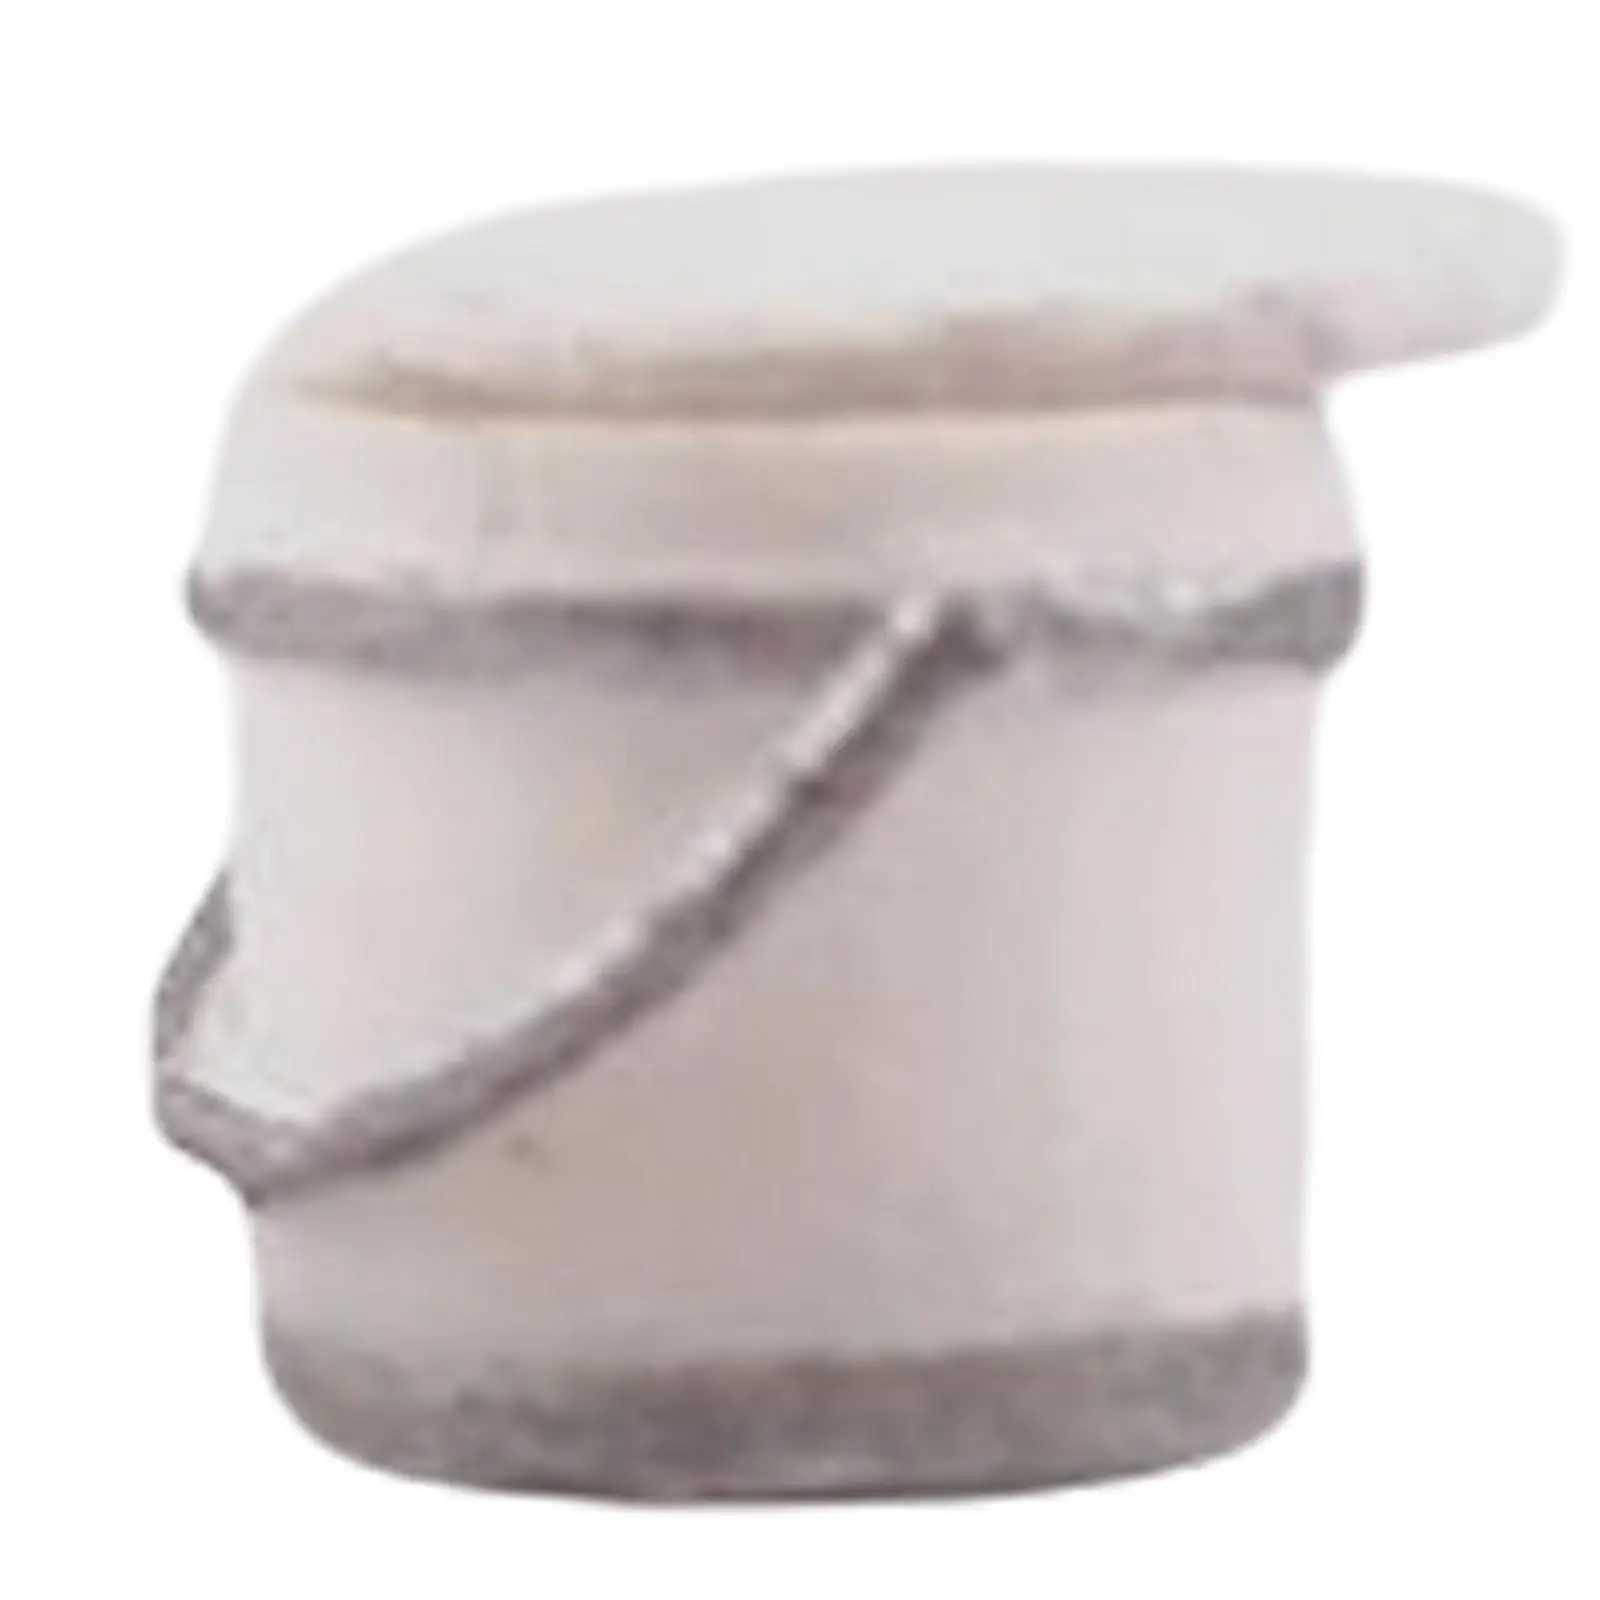 Miniature Paint Bucket Model 1:64 or 1:87 Accessories for Micro Landscape